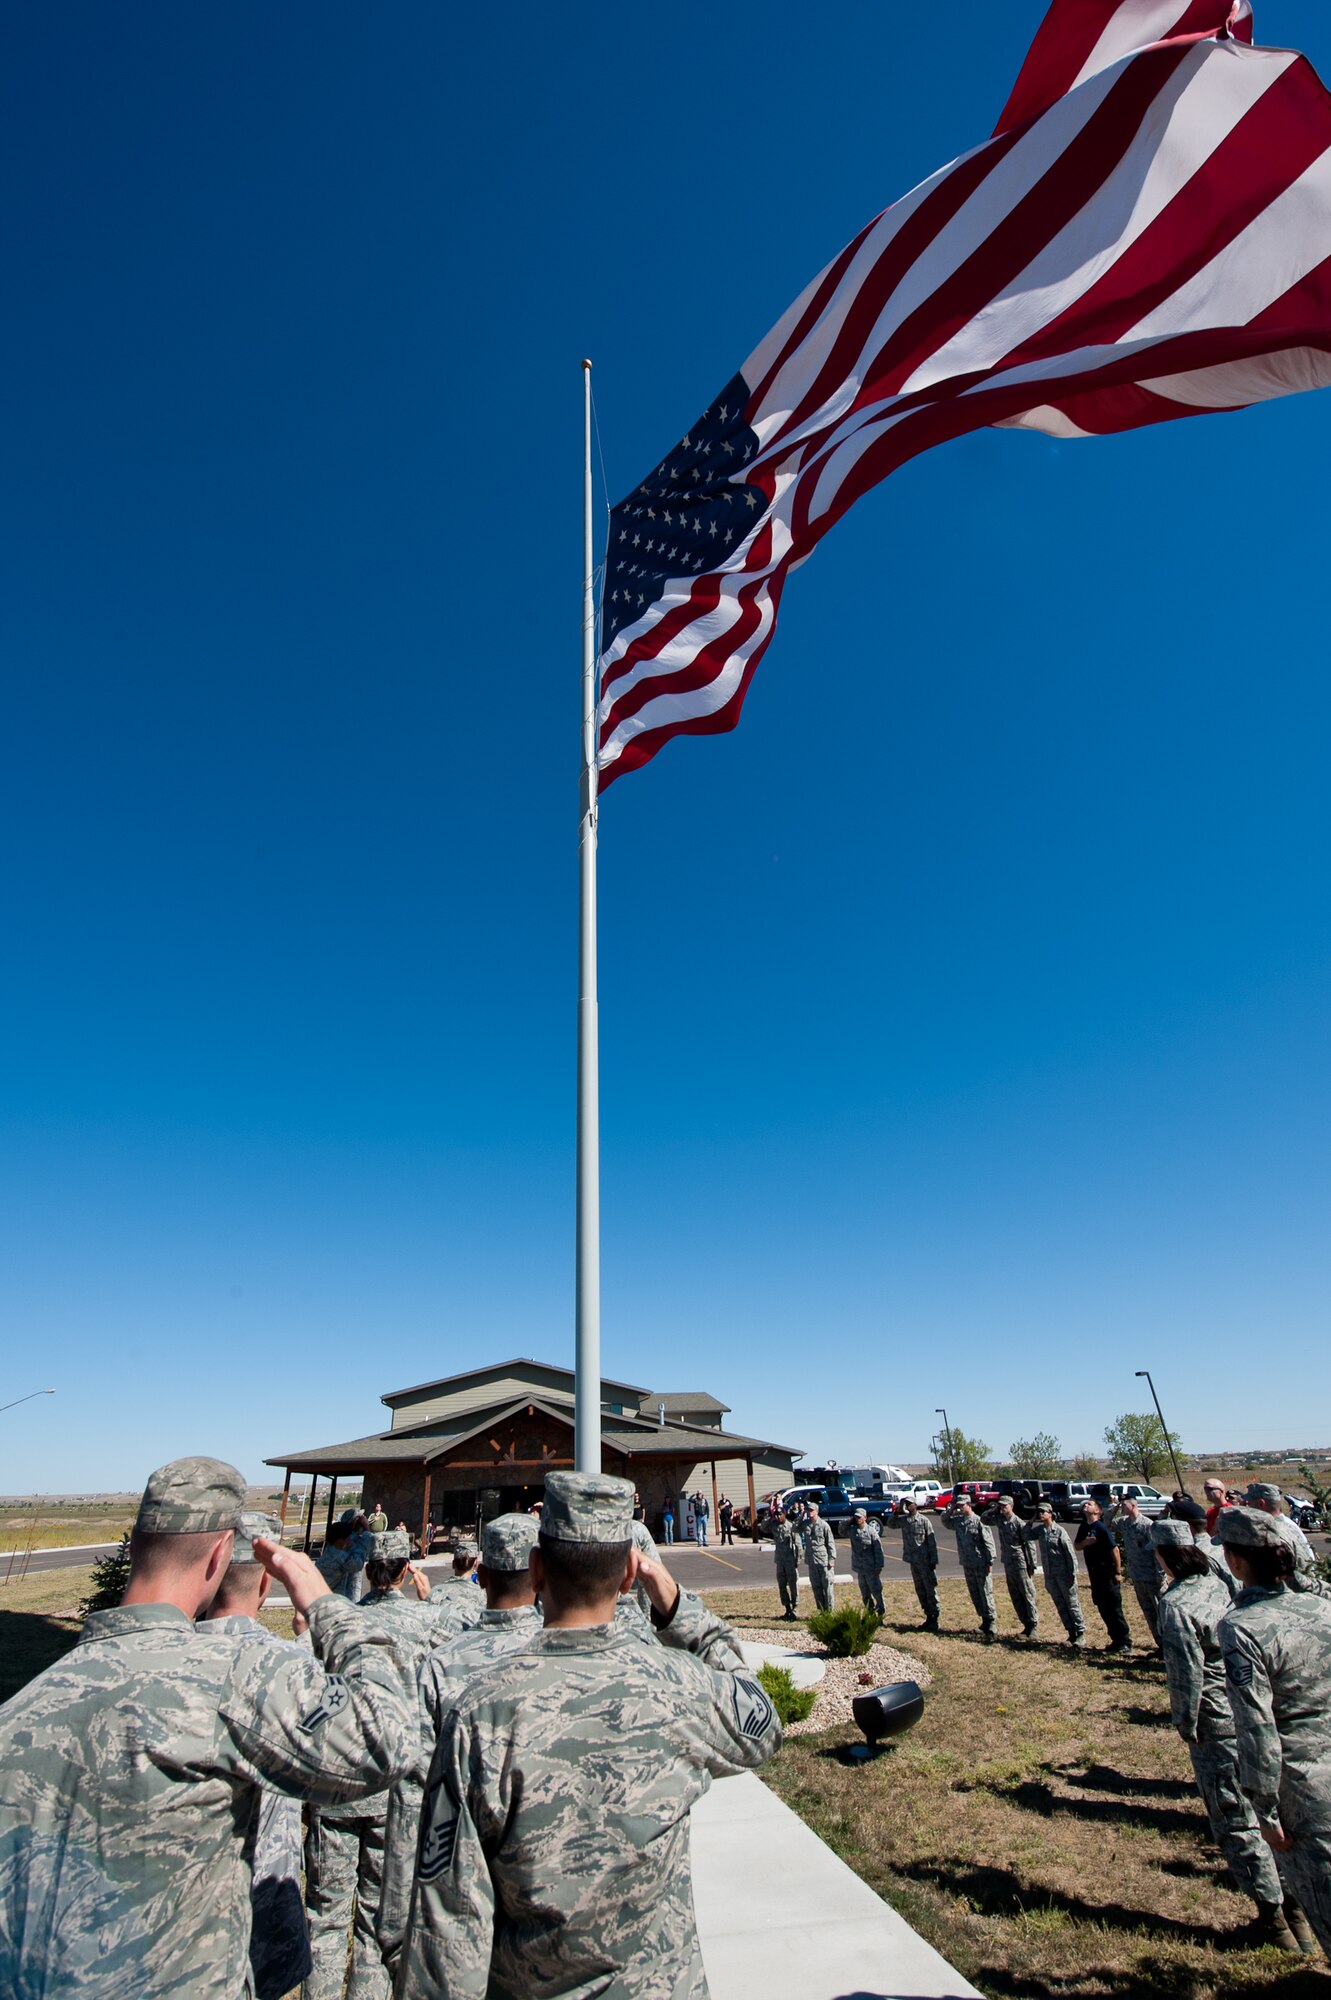 Airmen salute an American flag during a flag raising ceremony as part of a 9/11 Remembrance Ruck March on Ellsworth Air Force Base, S.D., Sept. 8, 2012. Airmen, families and first responders from surrounding communities gathered to recognize and honor the nearly 3,000 of lives lost 11 years ago on Sept. 11. (U.S. Air Force photo by Airman 1st Class Kate Thornton-Maurer)